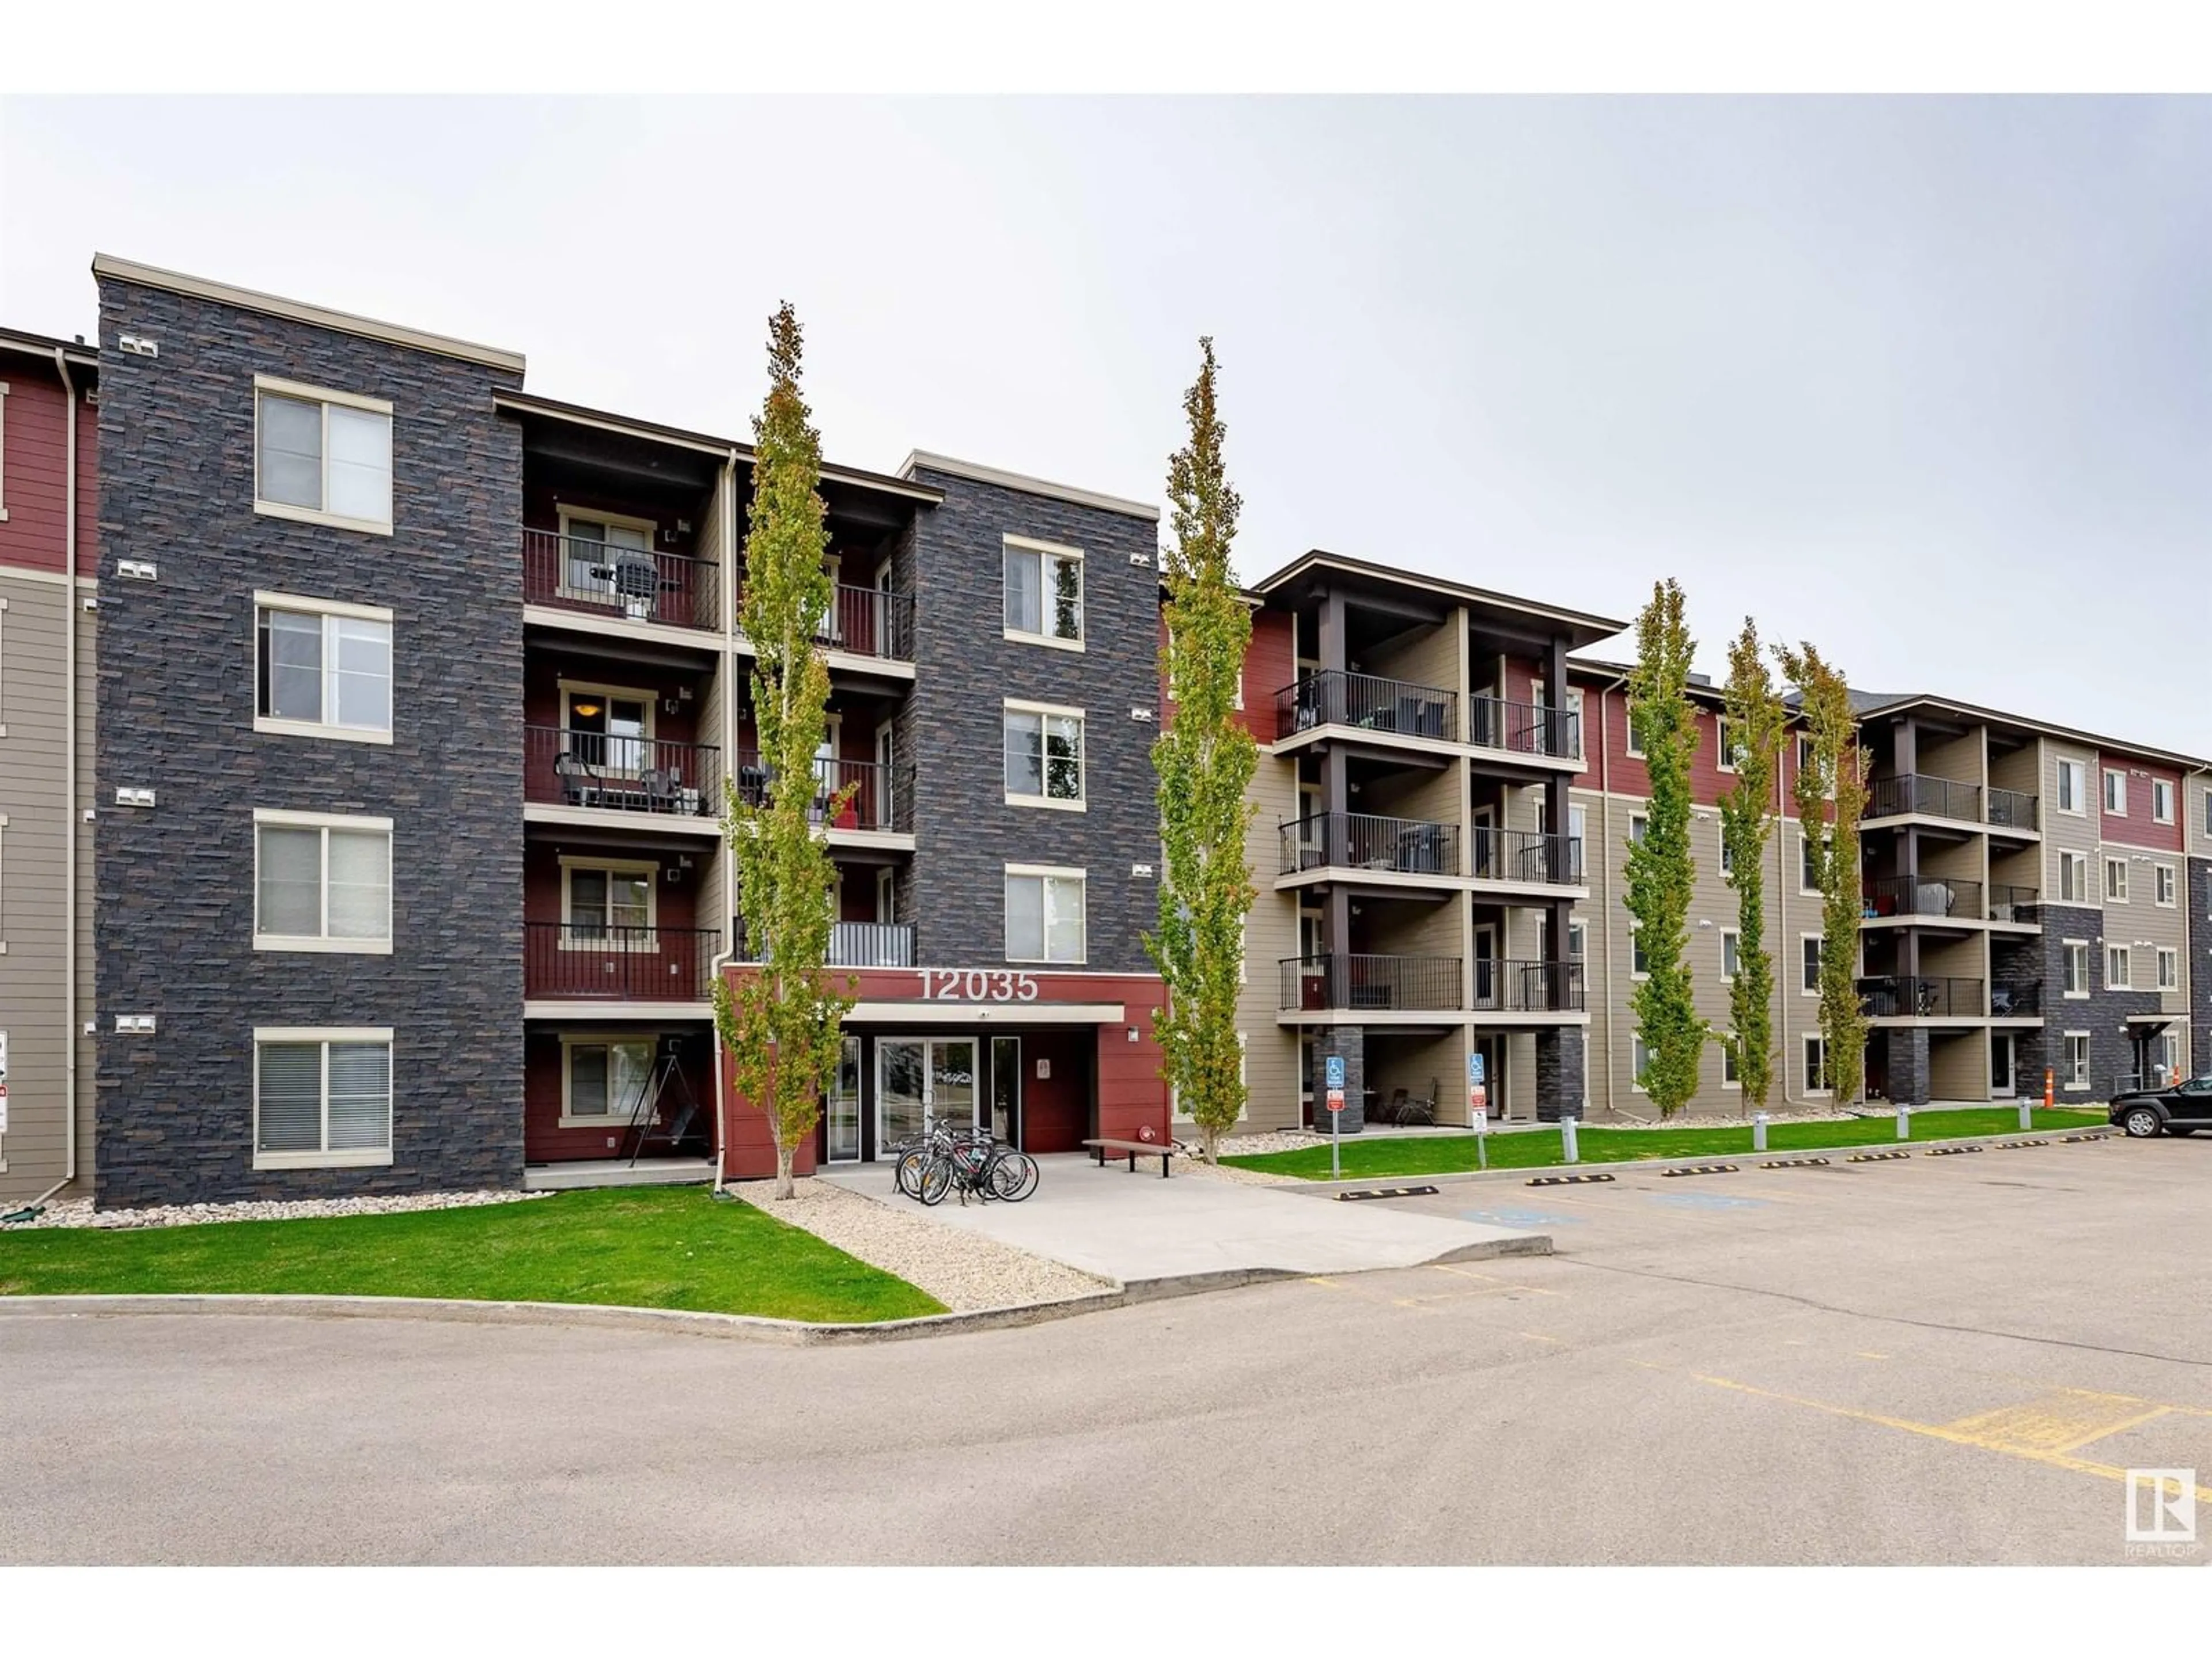 A pic from exterior of the house or condo for #407 12035 22 AV SW, Edmonton Alberta T6W0T1